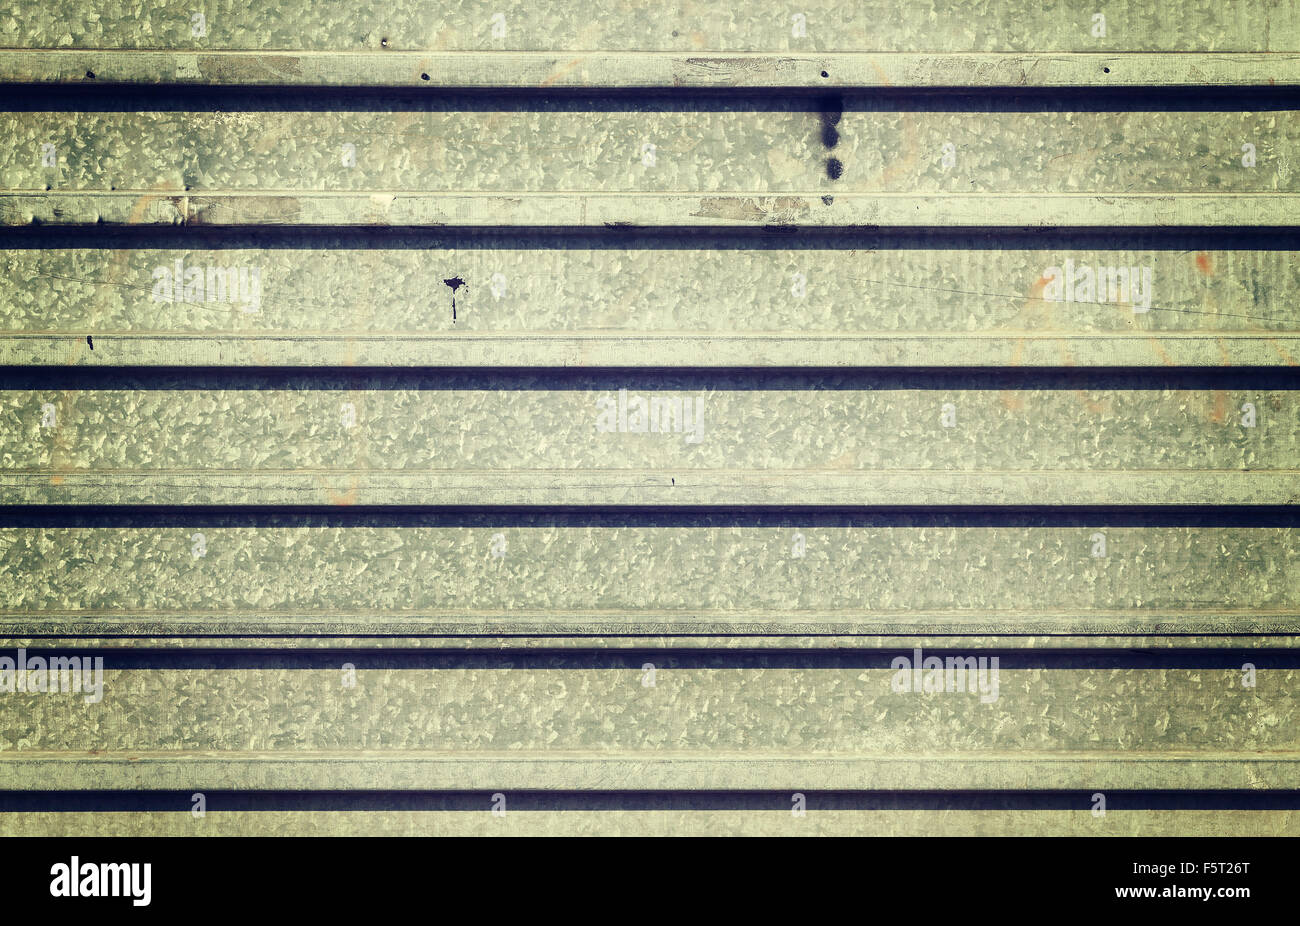 Grunge corrugated metal wall, abstract industrial background. Stock Photo